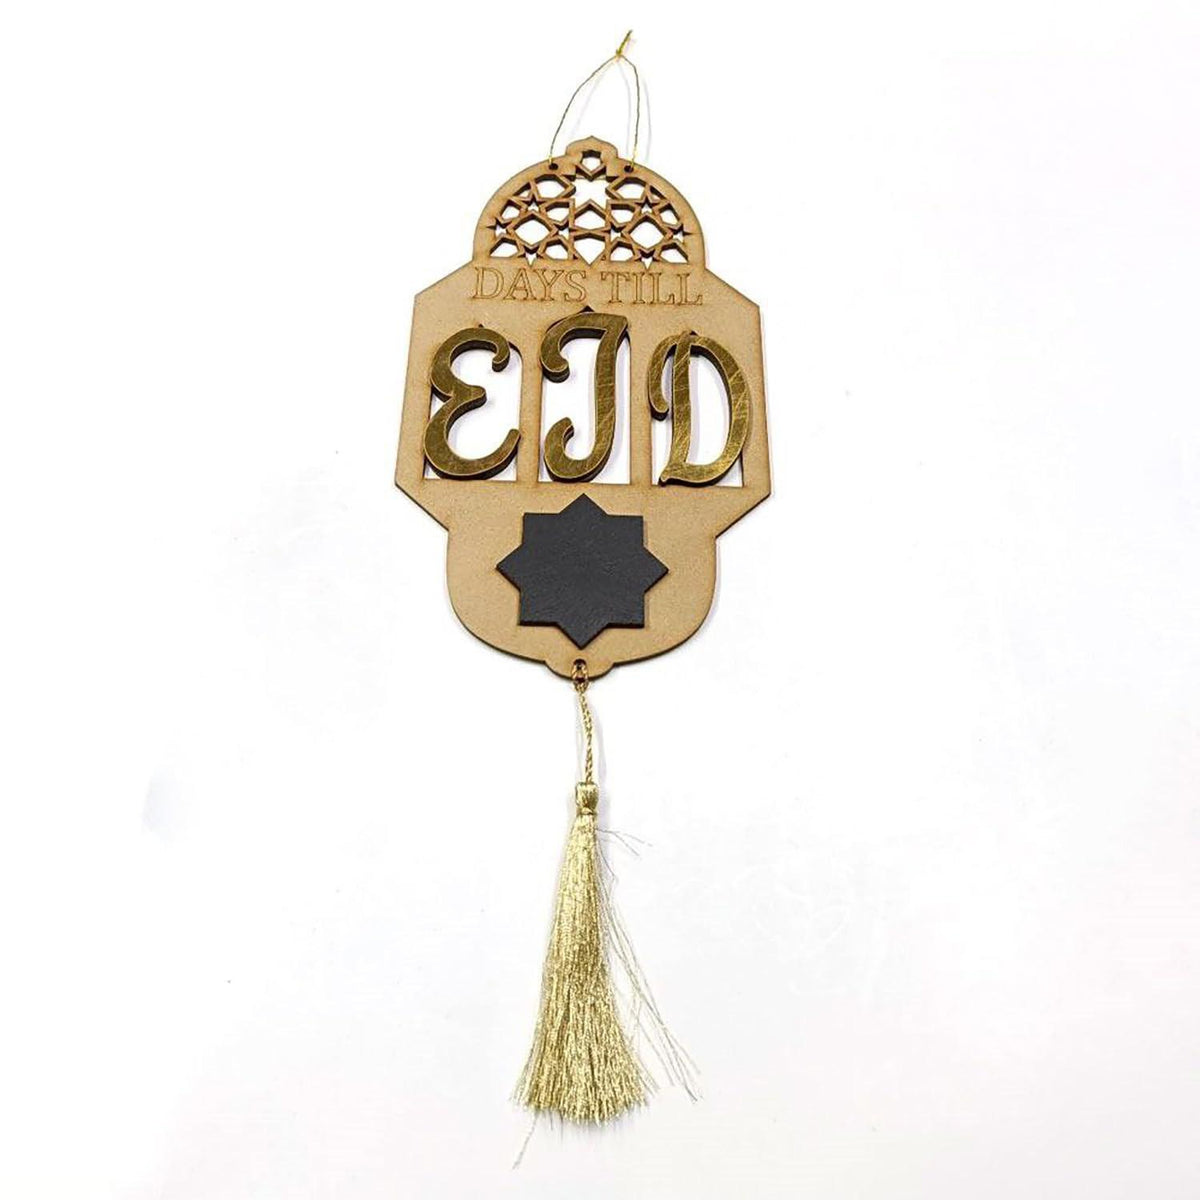 Haoser Eid Wooden Countdown Calendar, Beautifully Crafted Eid Countdown, Celebrations with our Wooden Calendar Countdown Hanging Ornament for Home Decoration - Haoser